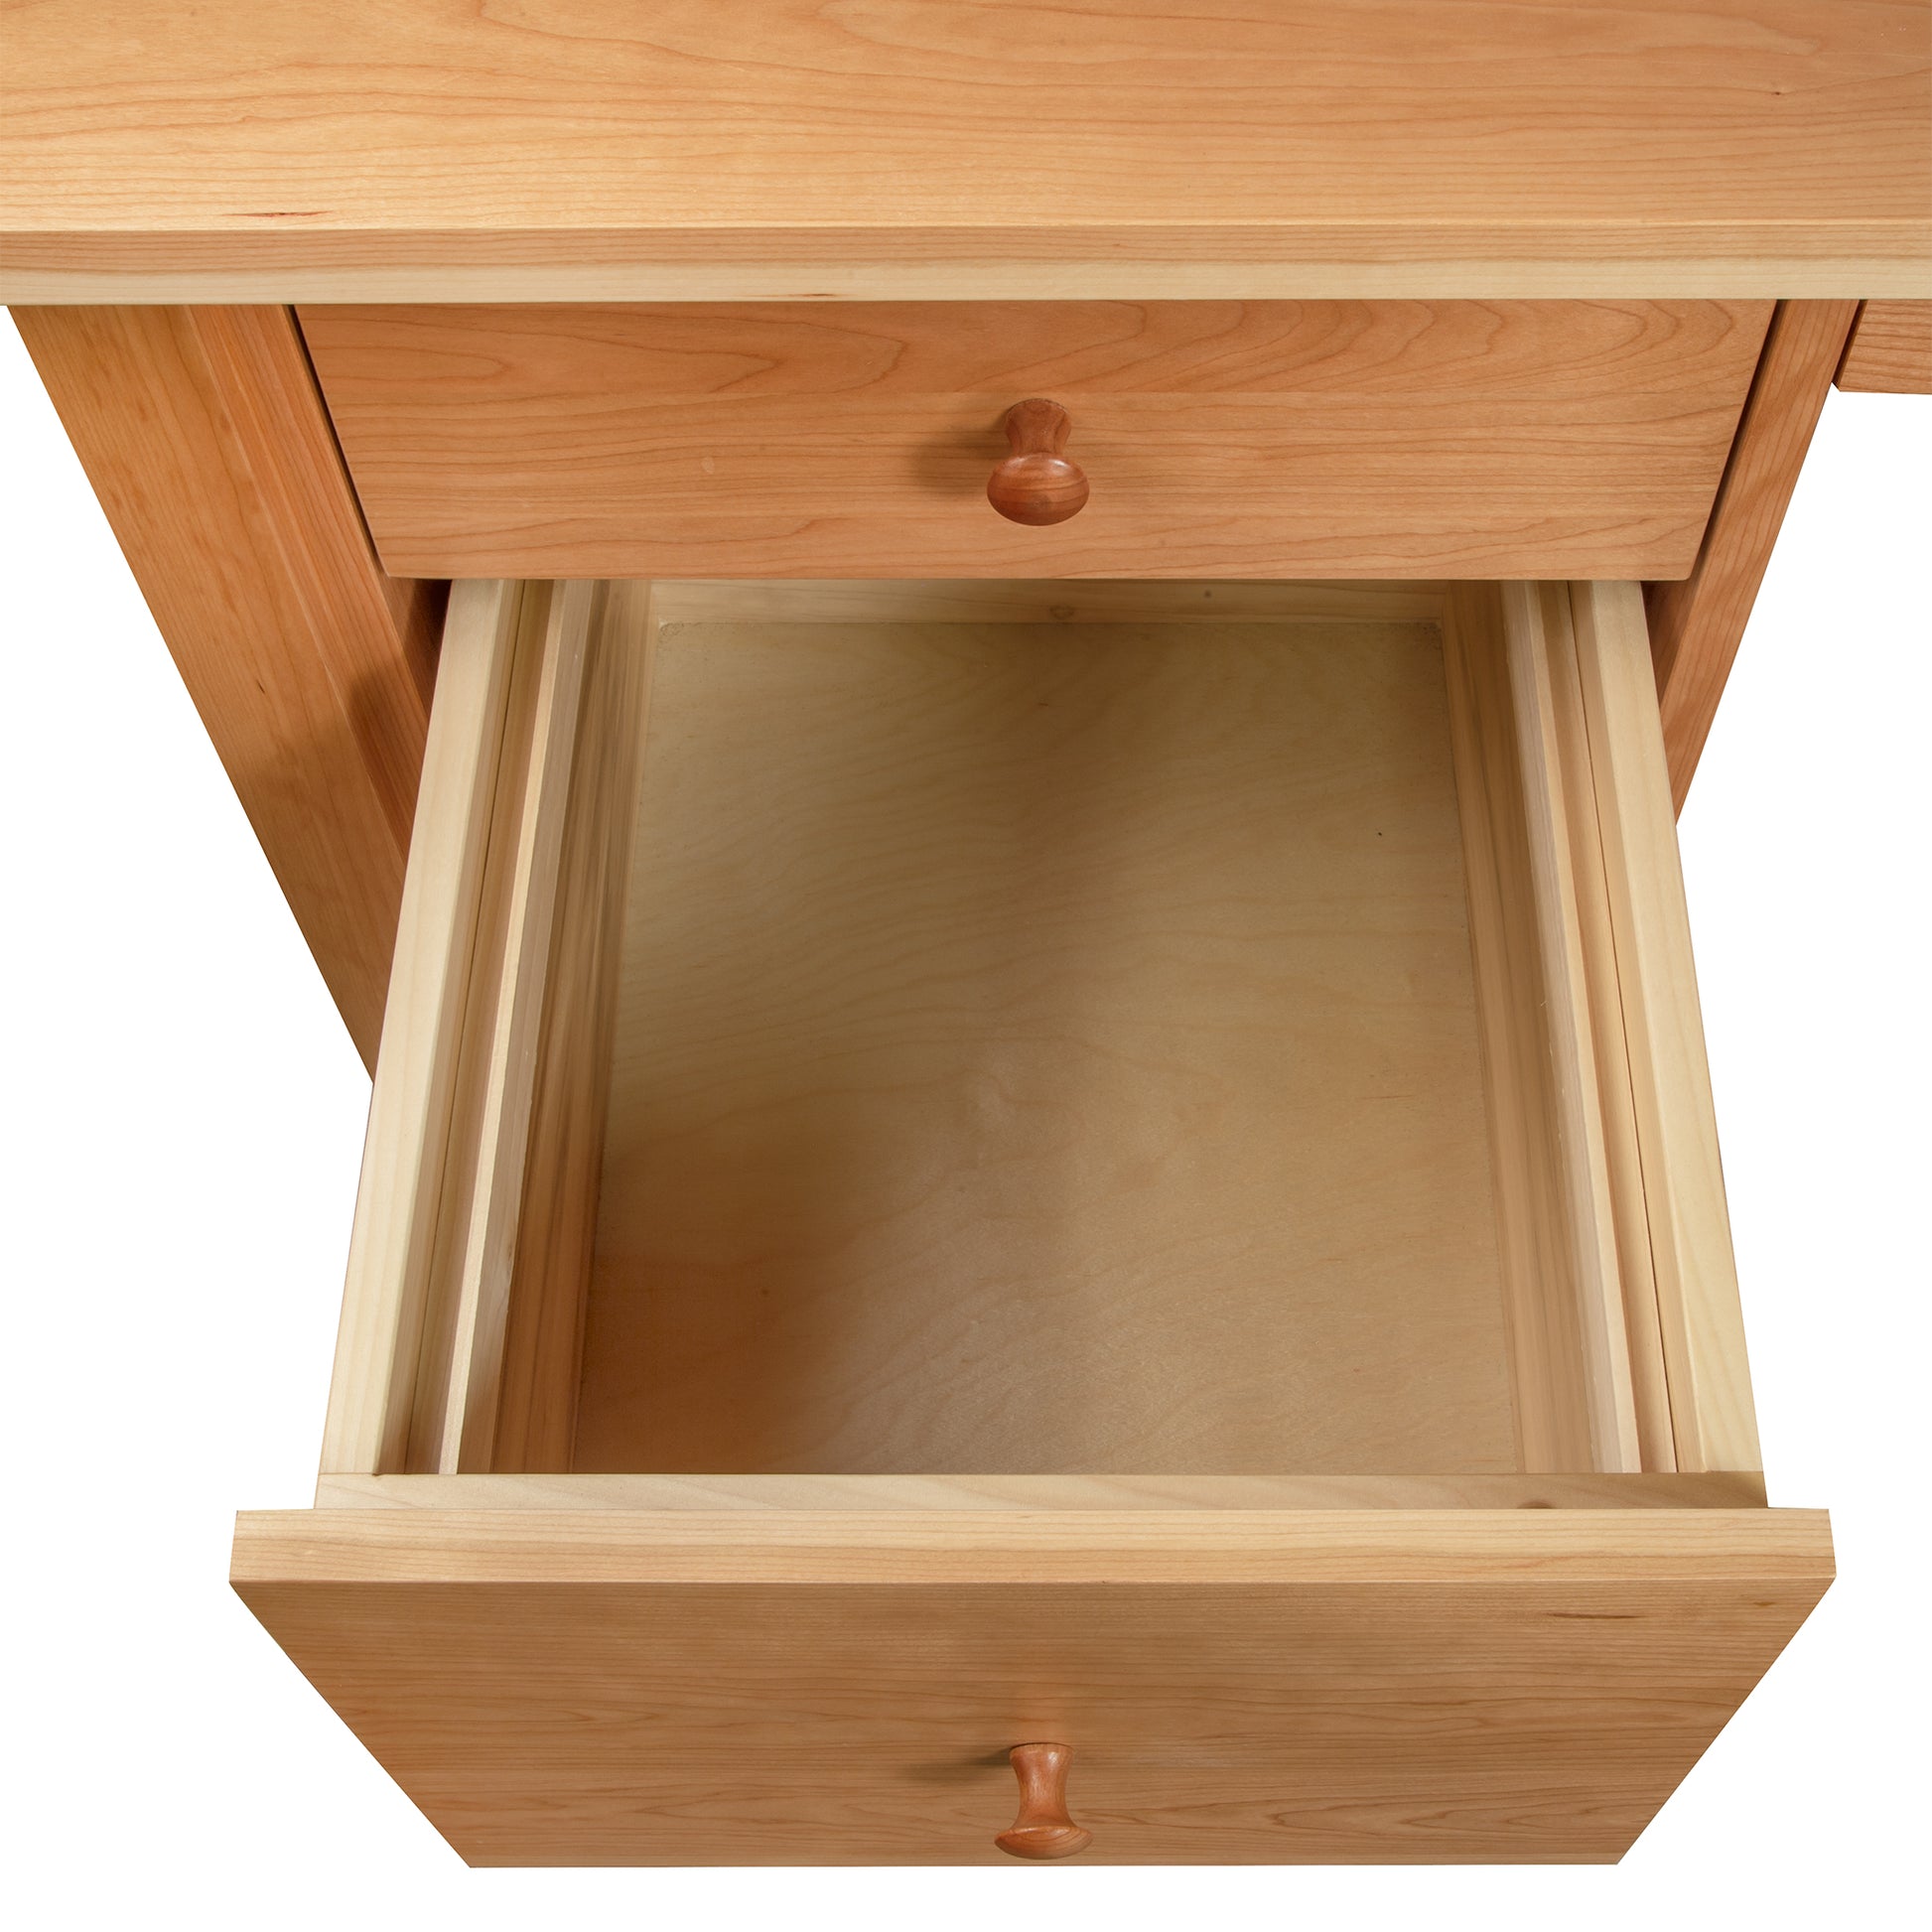 A wooden desk with a drawer under it.